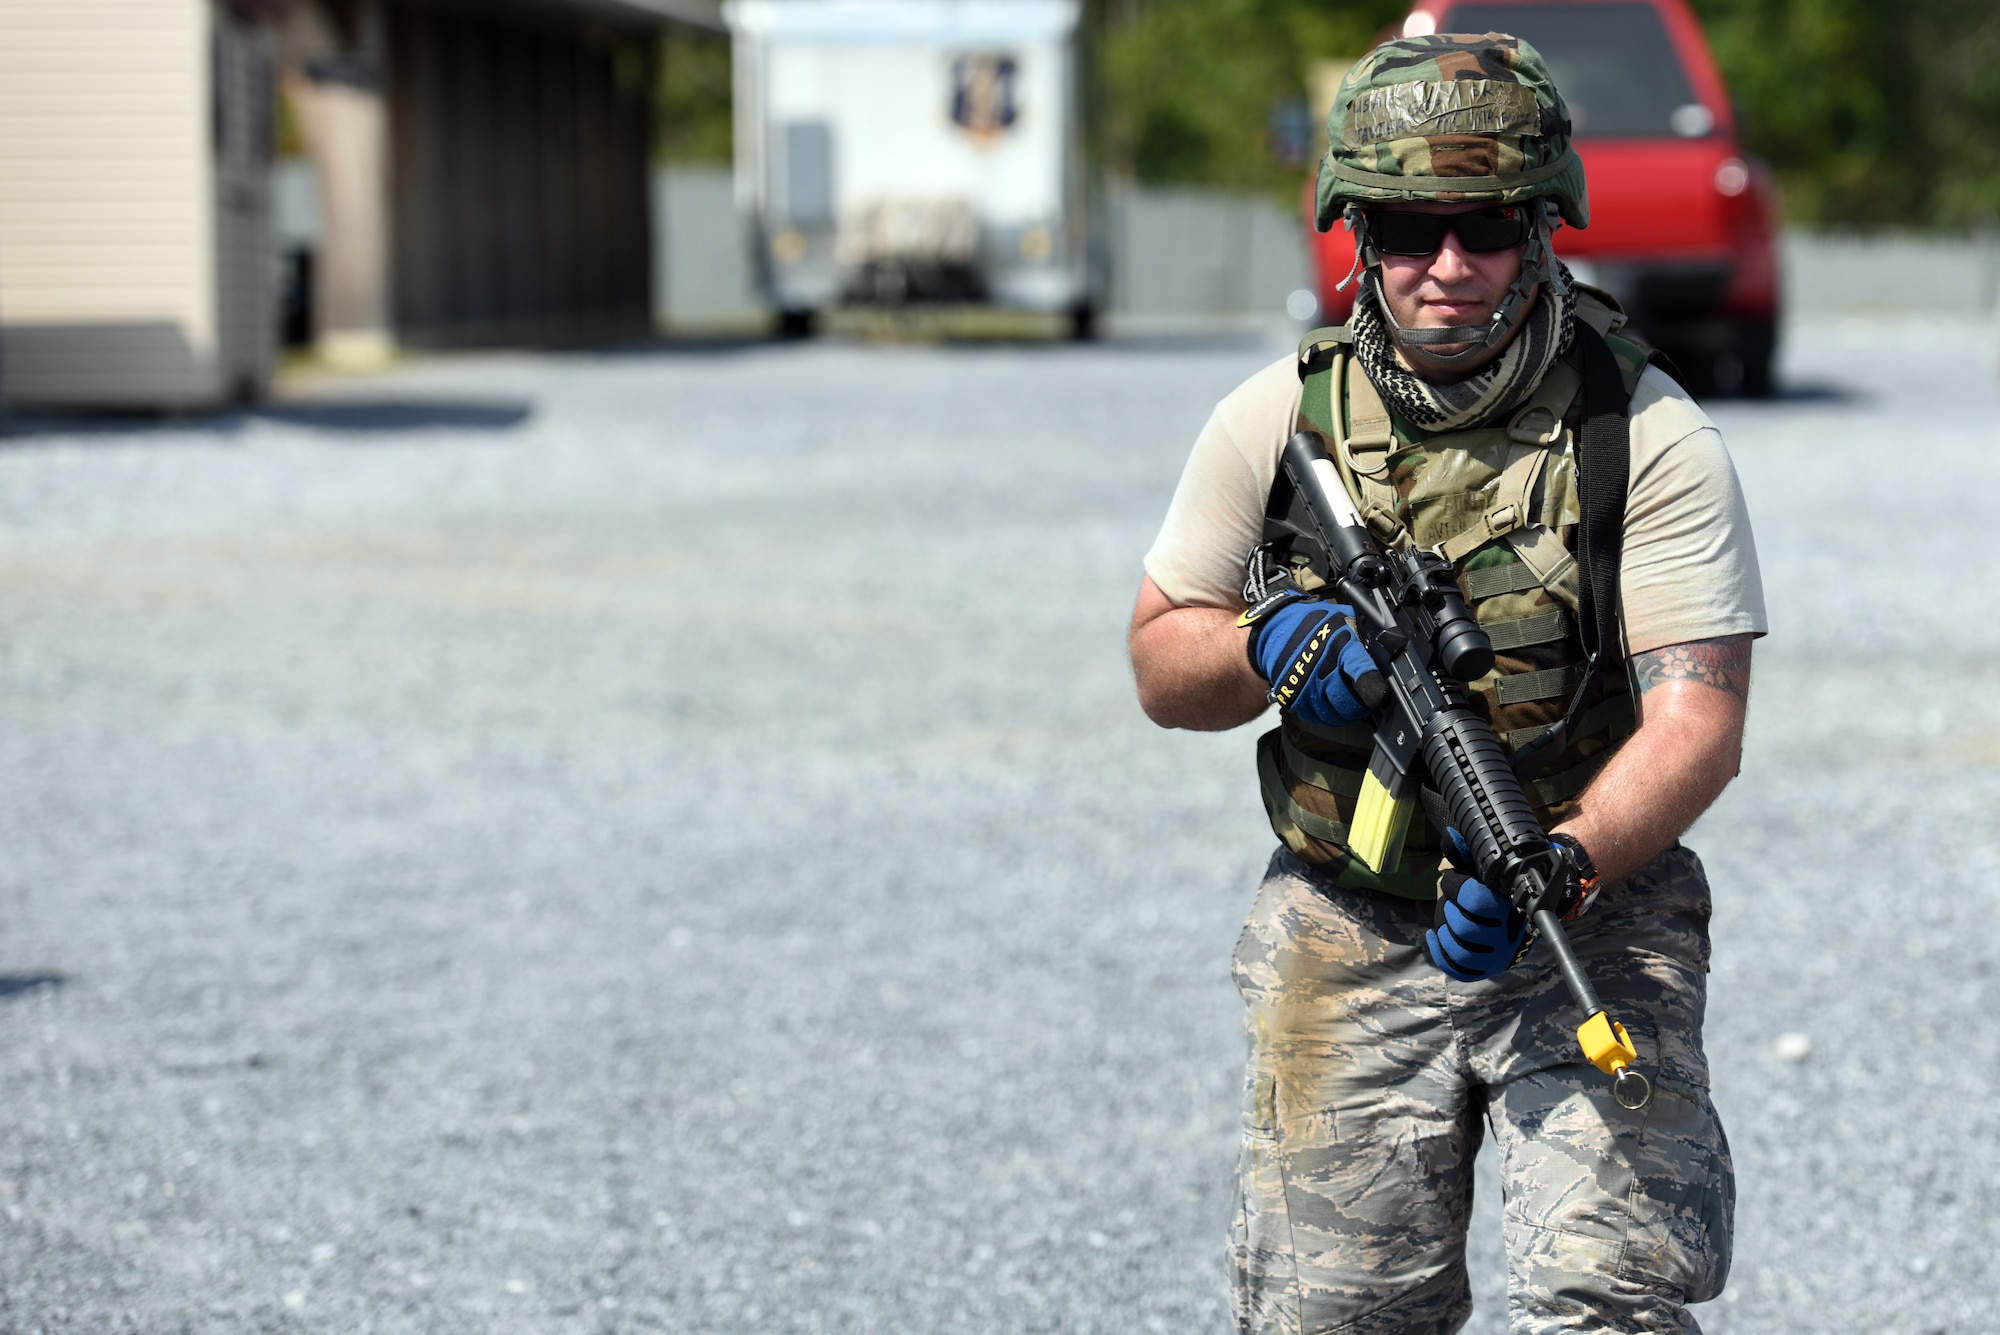 Tech. Sgt. Javier Acosta-Gomez, an electrical systems technician with the 201st RED HORSE Squadron, Fort Indiantown Gap, Pennsylvania, participates in a field training exercise Sept. 6, 2018. Acosta-Gomez was participating in the individual and team movements segment, which included movements such as high crawl, low crawl and ‘slicing the pie.’ (U.S. Air National Guard photo by Senior Airman Julia Sorber/Released)